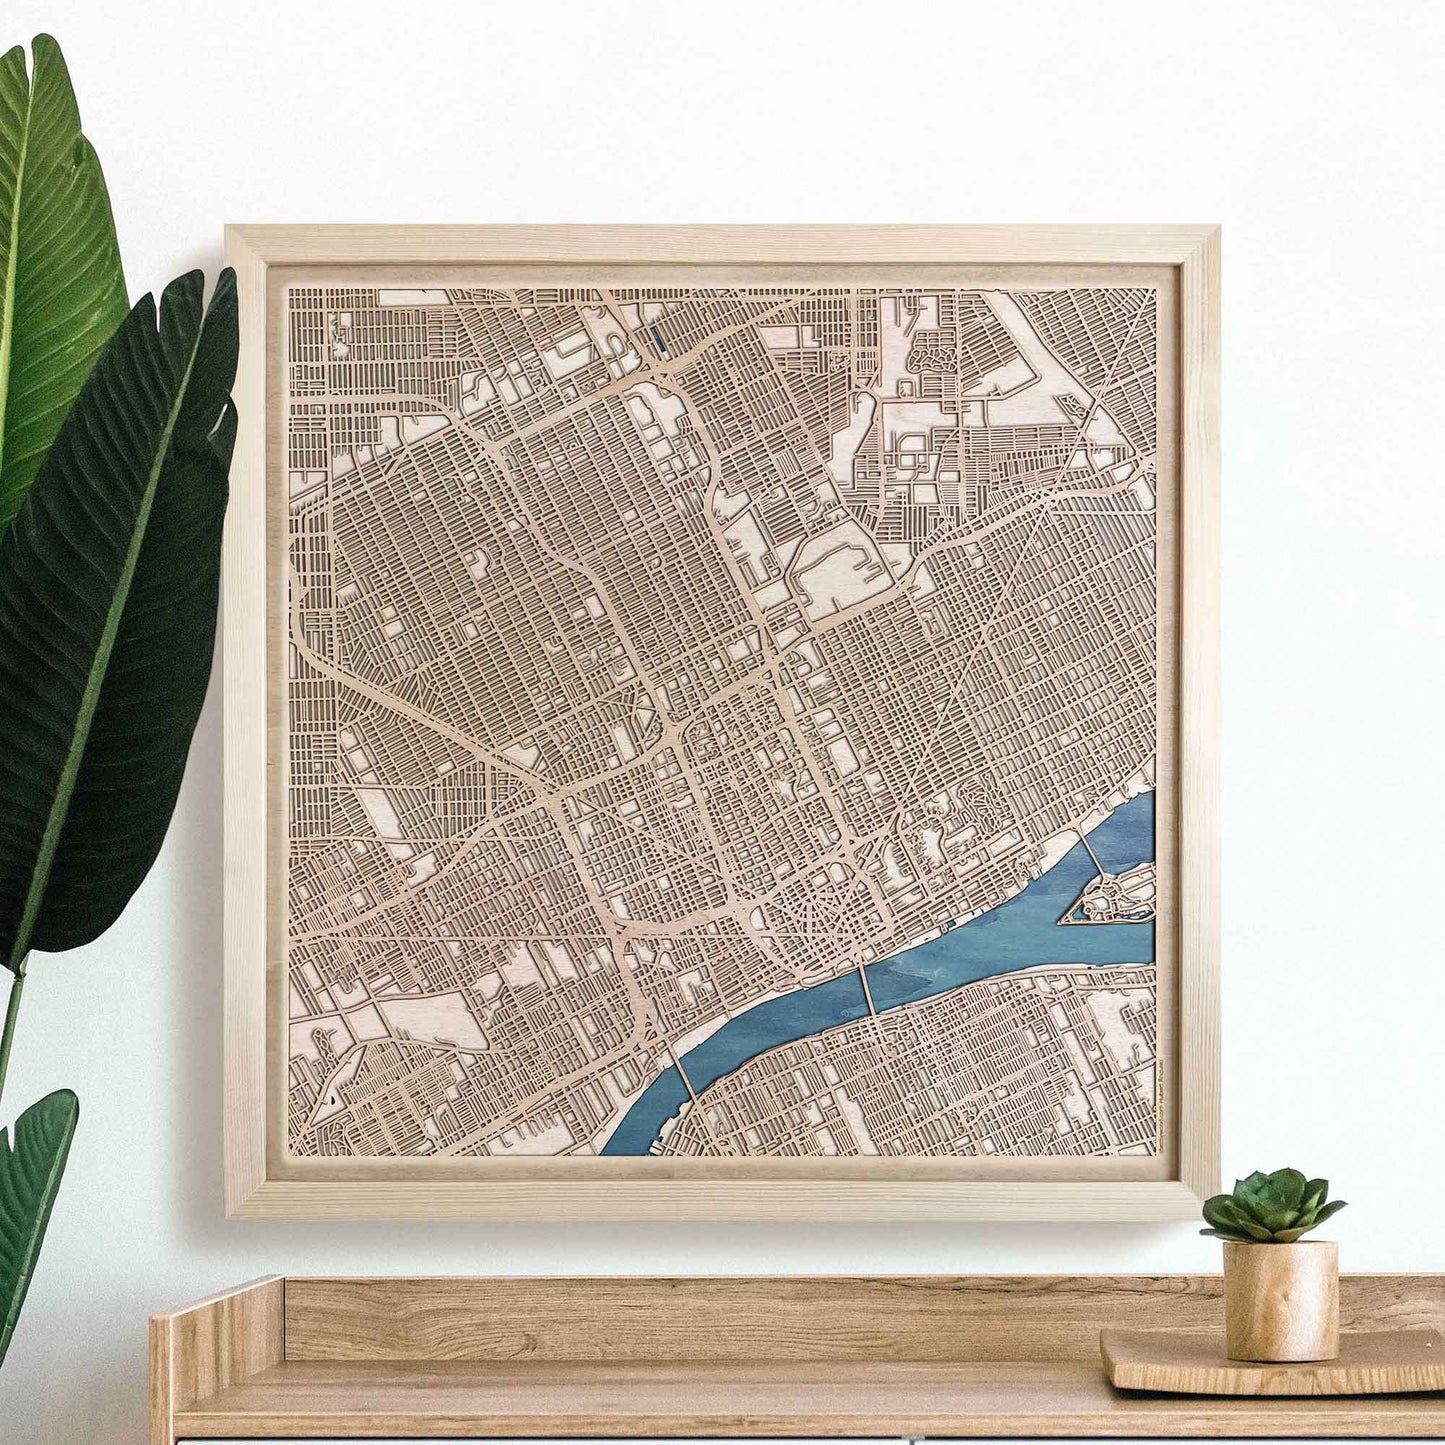 Detroit Wooden Map by CityWood - Custom Wood Map Art - Unique Laser Cut Engraved - Anniversary Gift